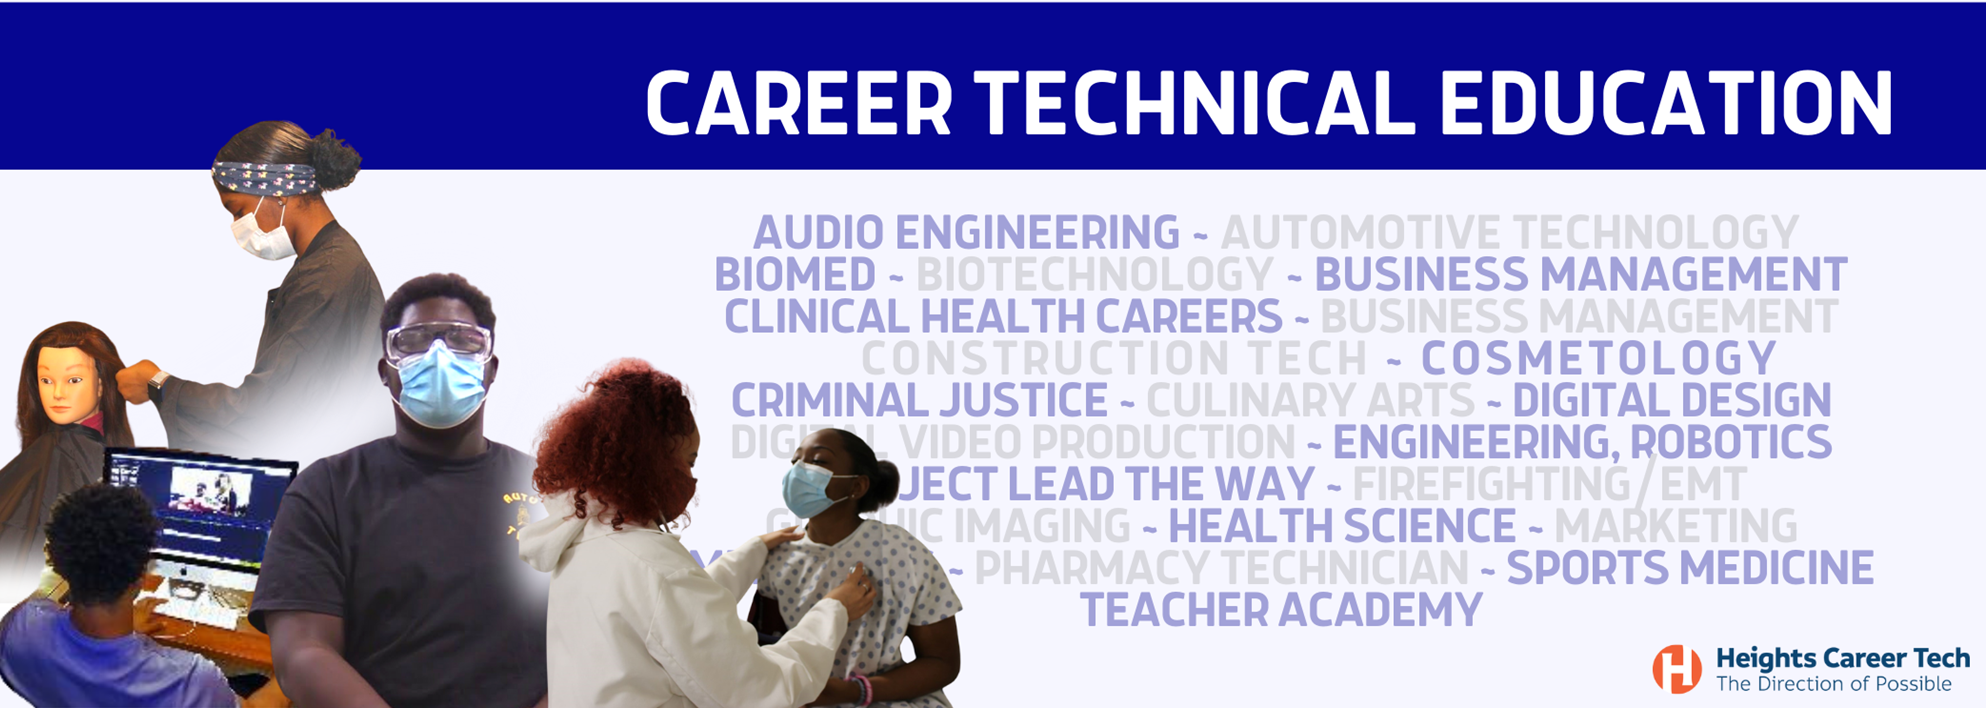 audio engineering ~ Automotive Technology  BioMed ~ Biotechnology ~ Business Management Clinical health careers ~ Business Management       Construction Tech ~ Cosmetology Criminal Justice ~ Culinary Arts ~ Digital Design Digital Video Production ~ Engineering, Robotics Project Lead the way ~ Firefighting/EMT Graphic IMaging ~ Health science ~ Marketing Media Arts ~ Pharmacy Technician ~ Sports Medicine Teacher Academy